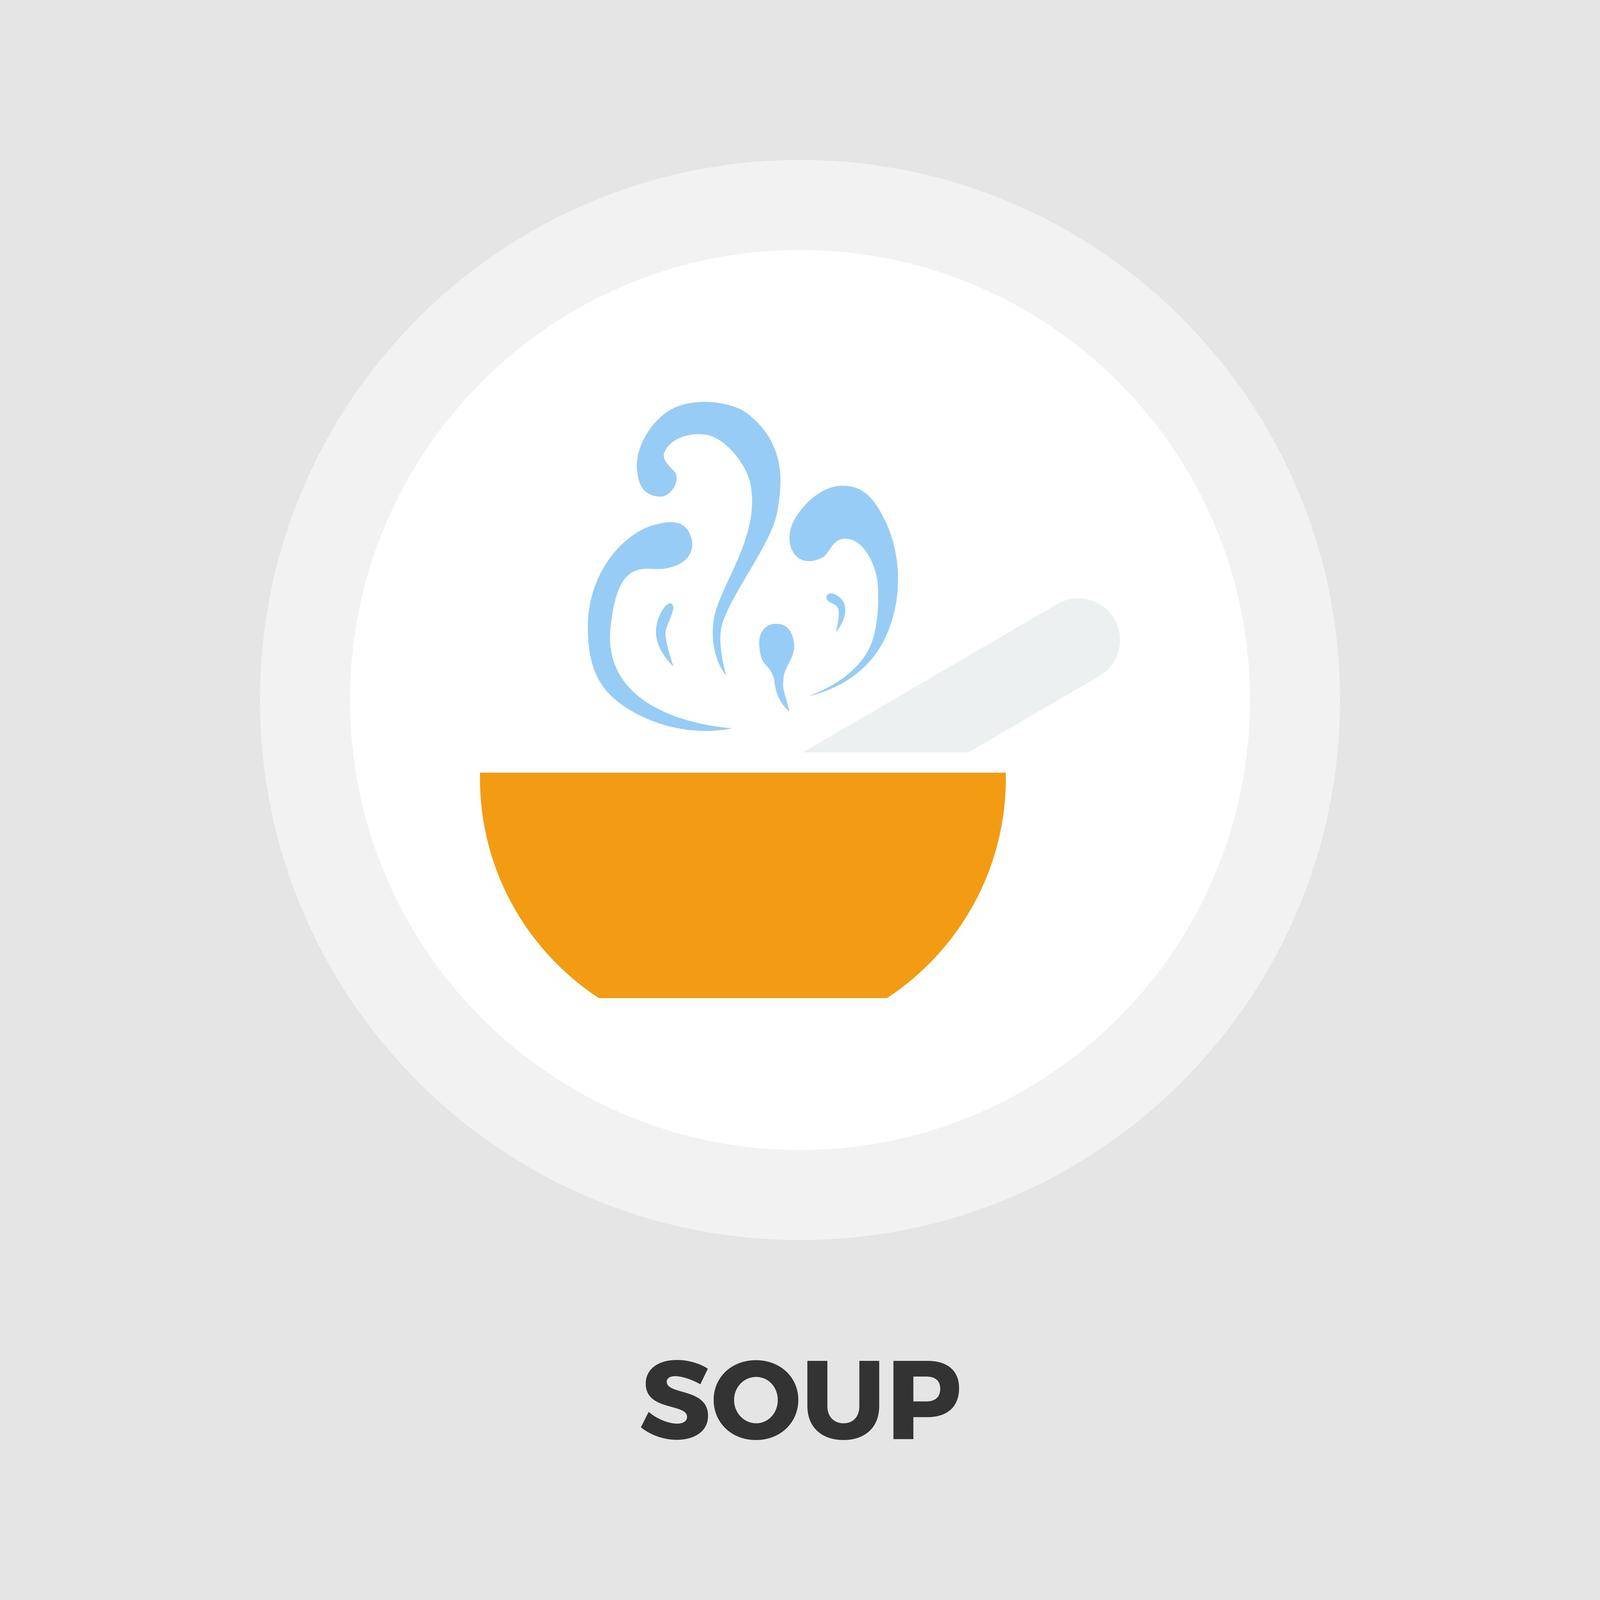 Soup icon vector. Flat icon isolated on the white background. Editable EPS file. Vector illustration.